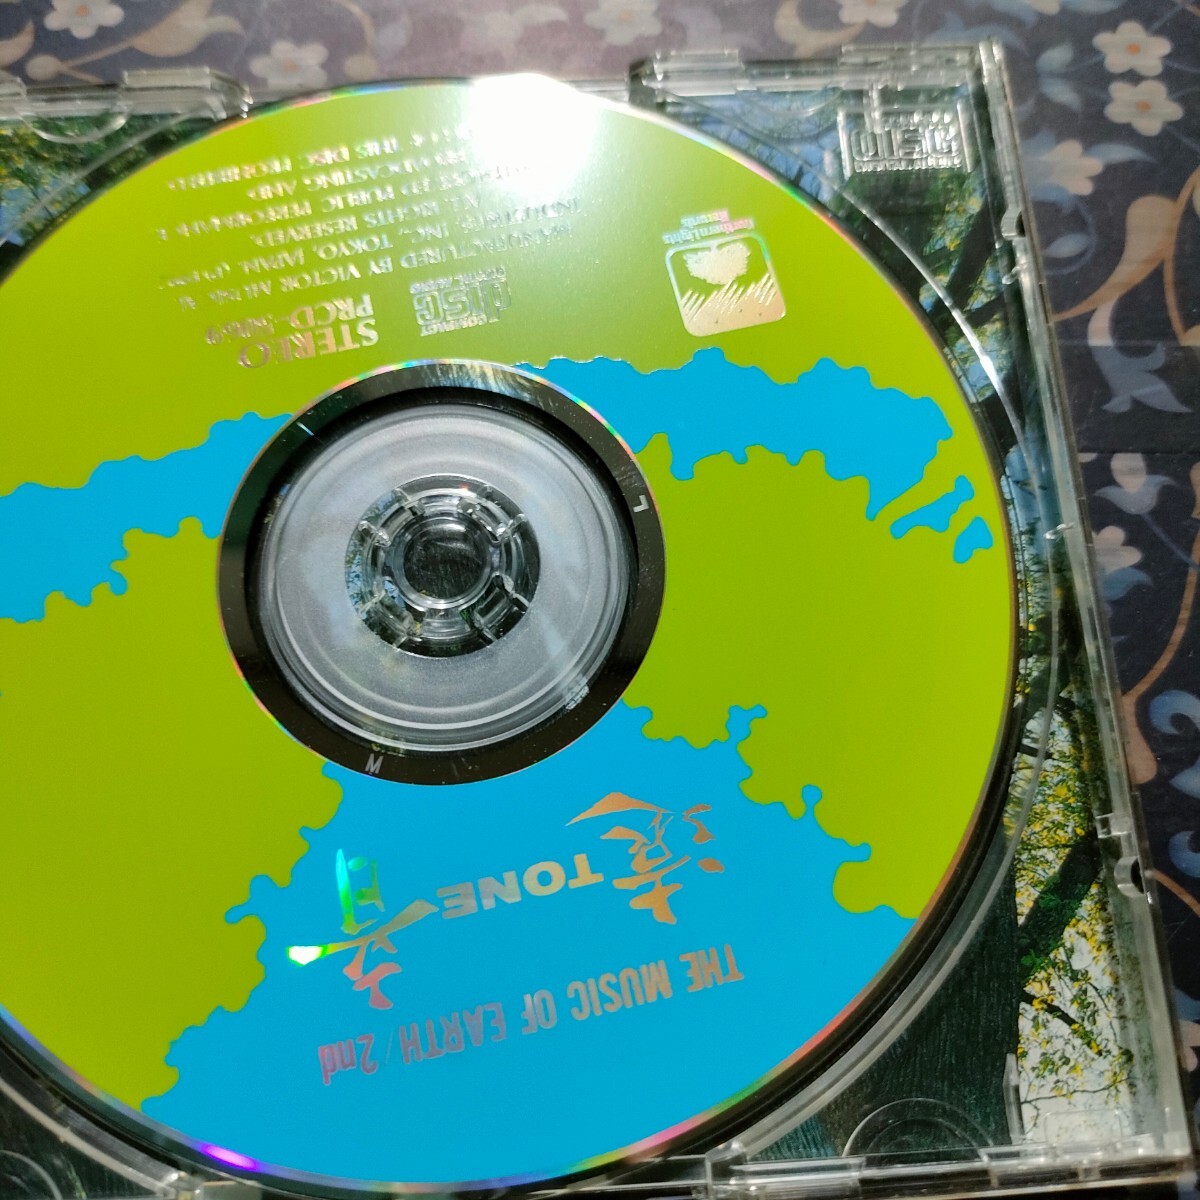 CD 遠音　The Music of Earth2 　TONE 即決　送料込み_画像3